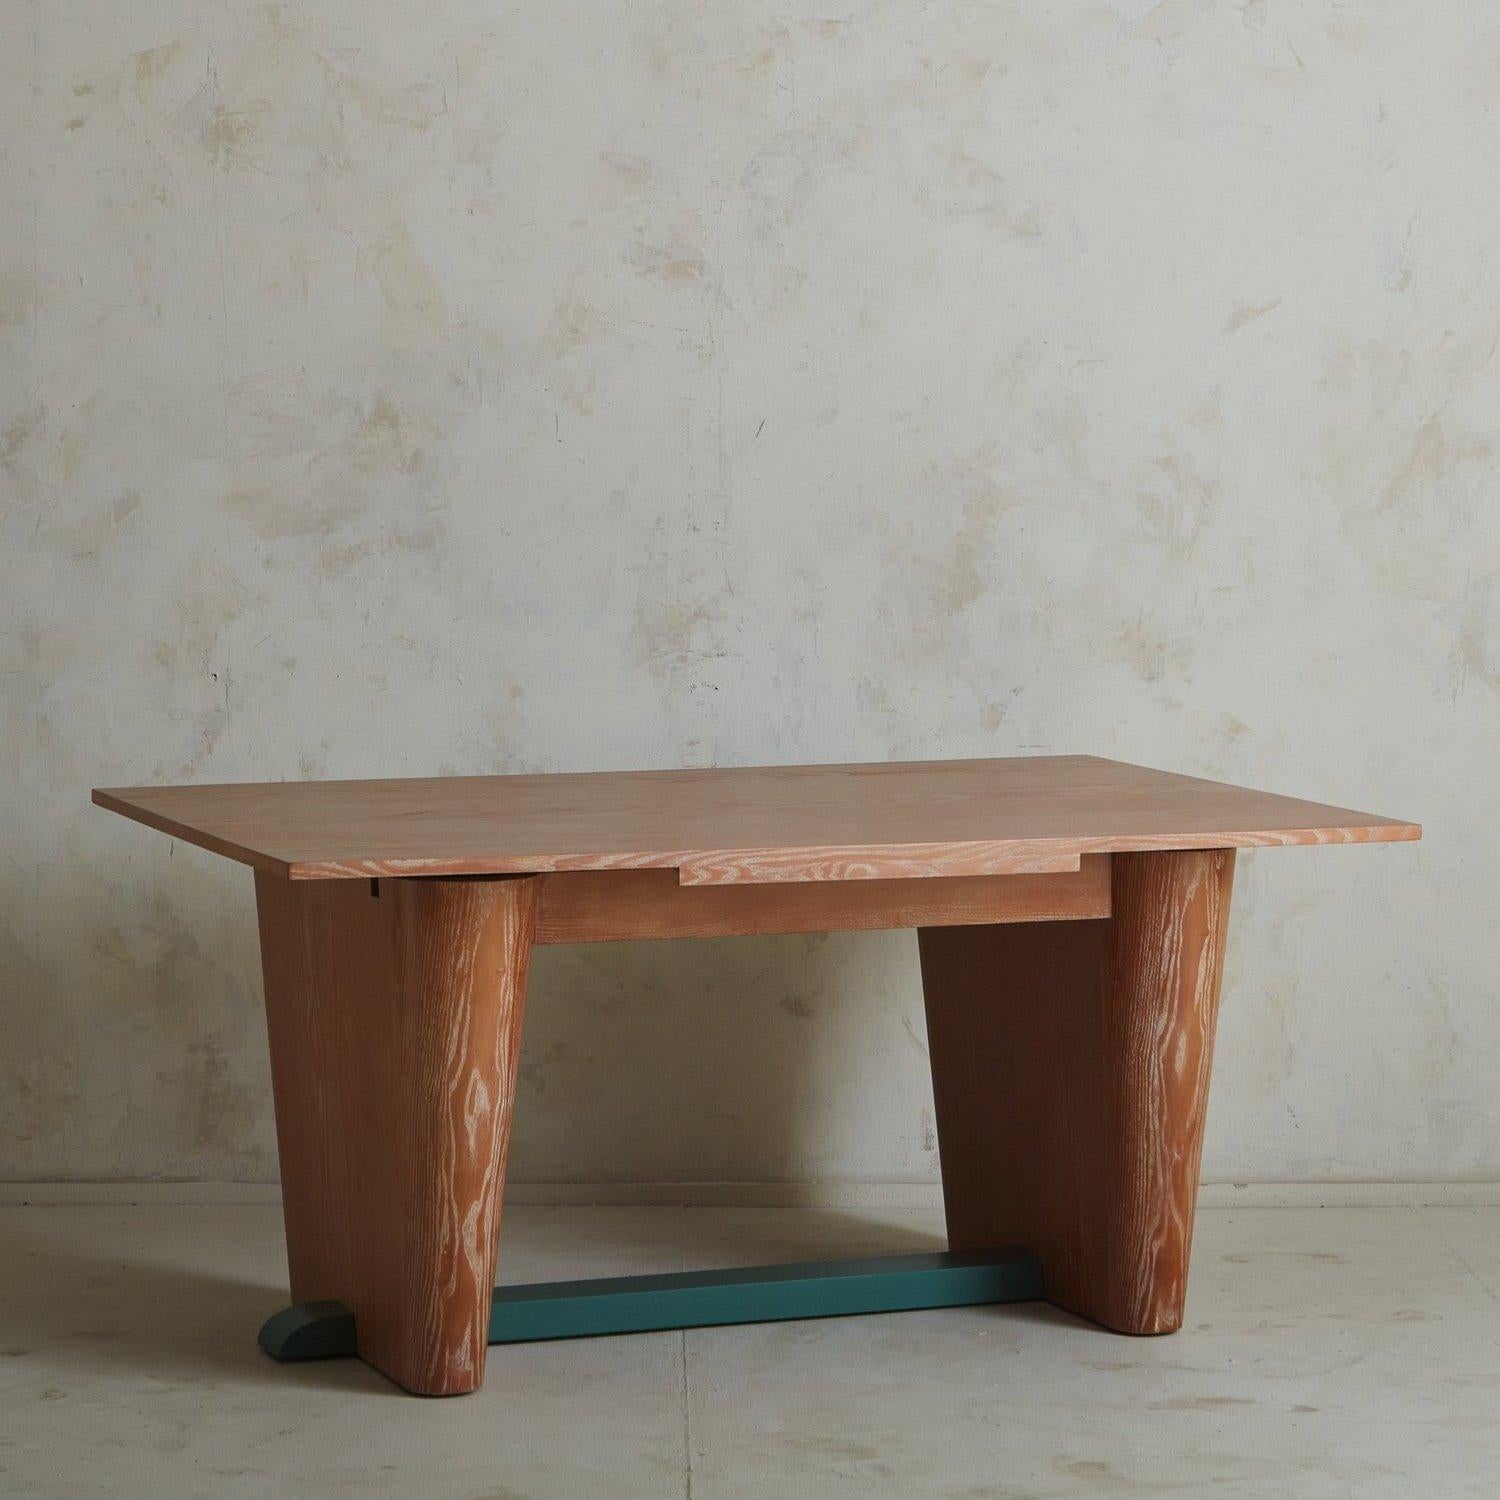 A 1940s French dining table or desk in the style of Jules Leleu. This table was constructed with ash wood and features a sculptural trestle base with a teal painted support bar. The ash wood has remarkable, painterly graining, which is emphasized by